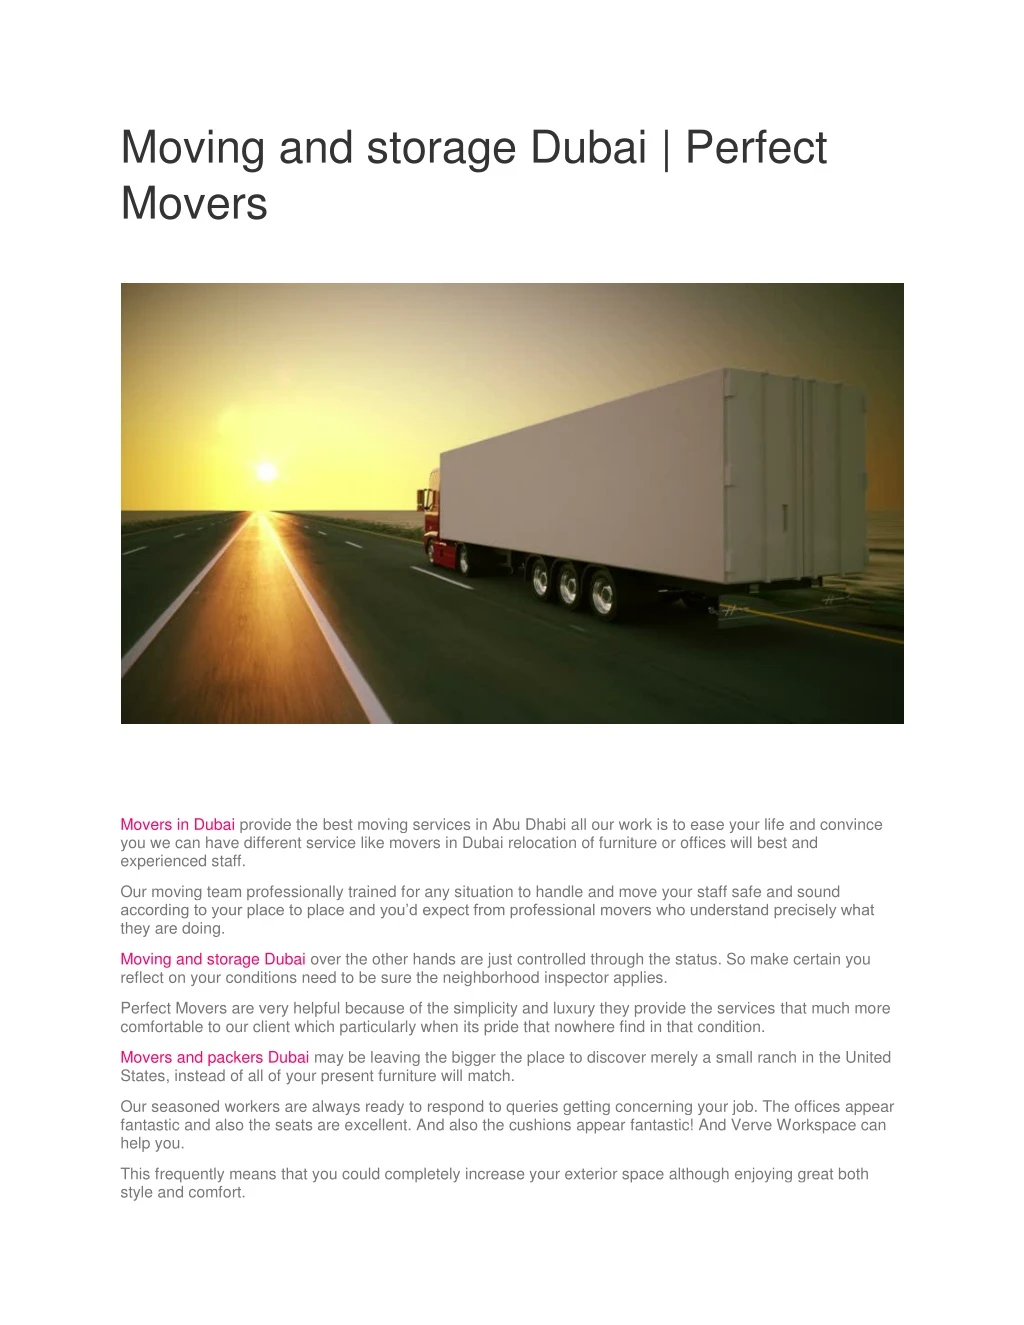 moving and storage dubai perfect movers